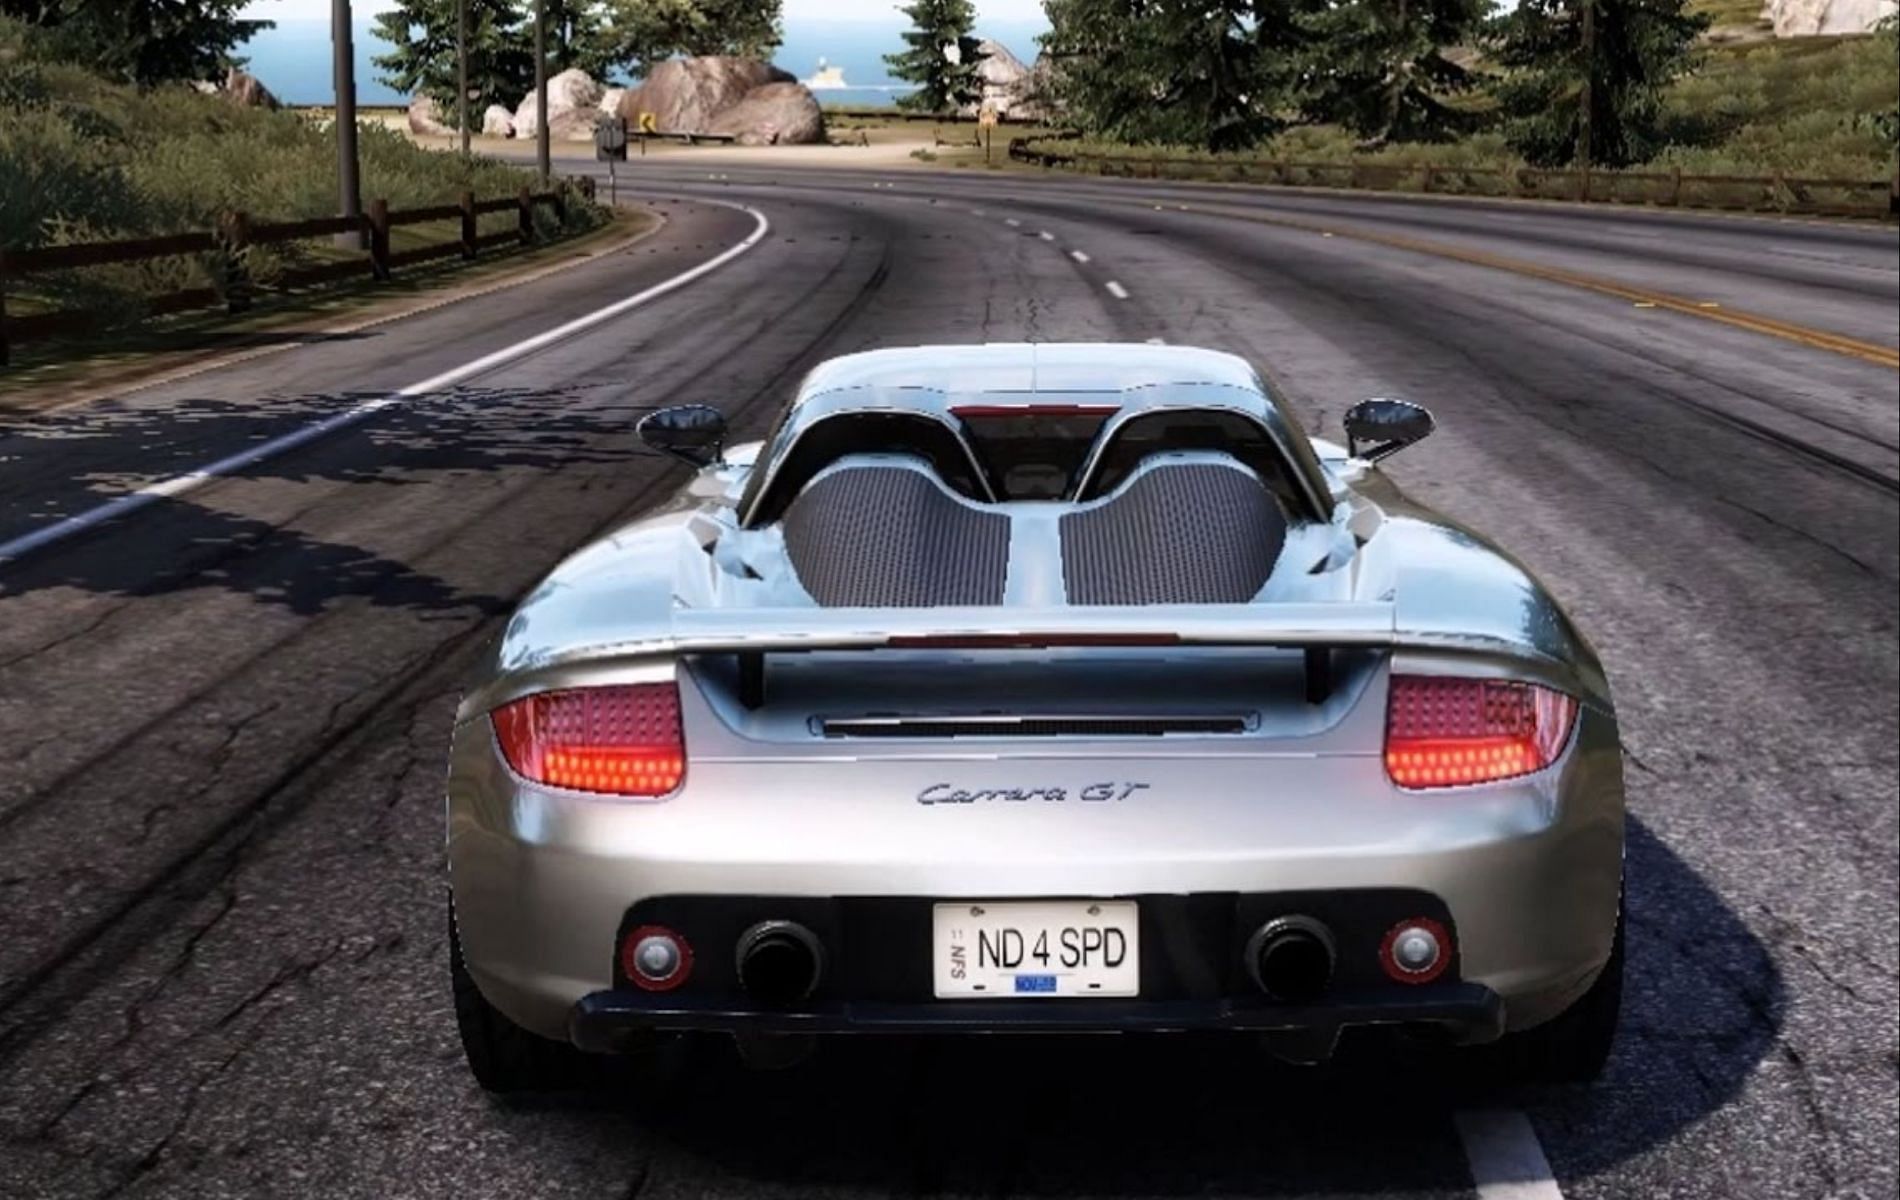 The Porche Carrera GT first made its appearance in NFS Porche Unleashed (Image via Thorneful/YouTube)